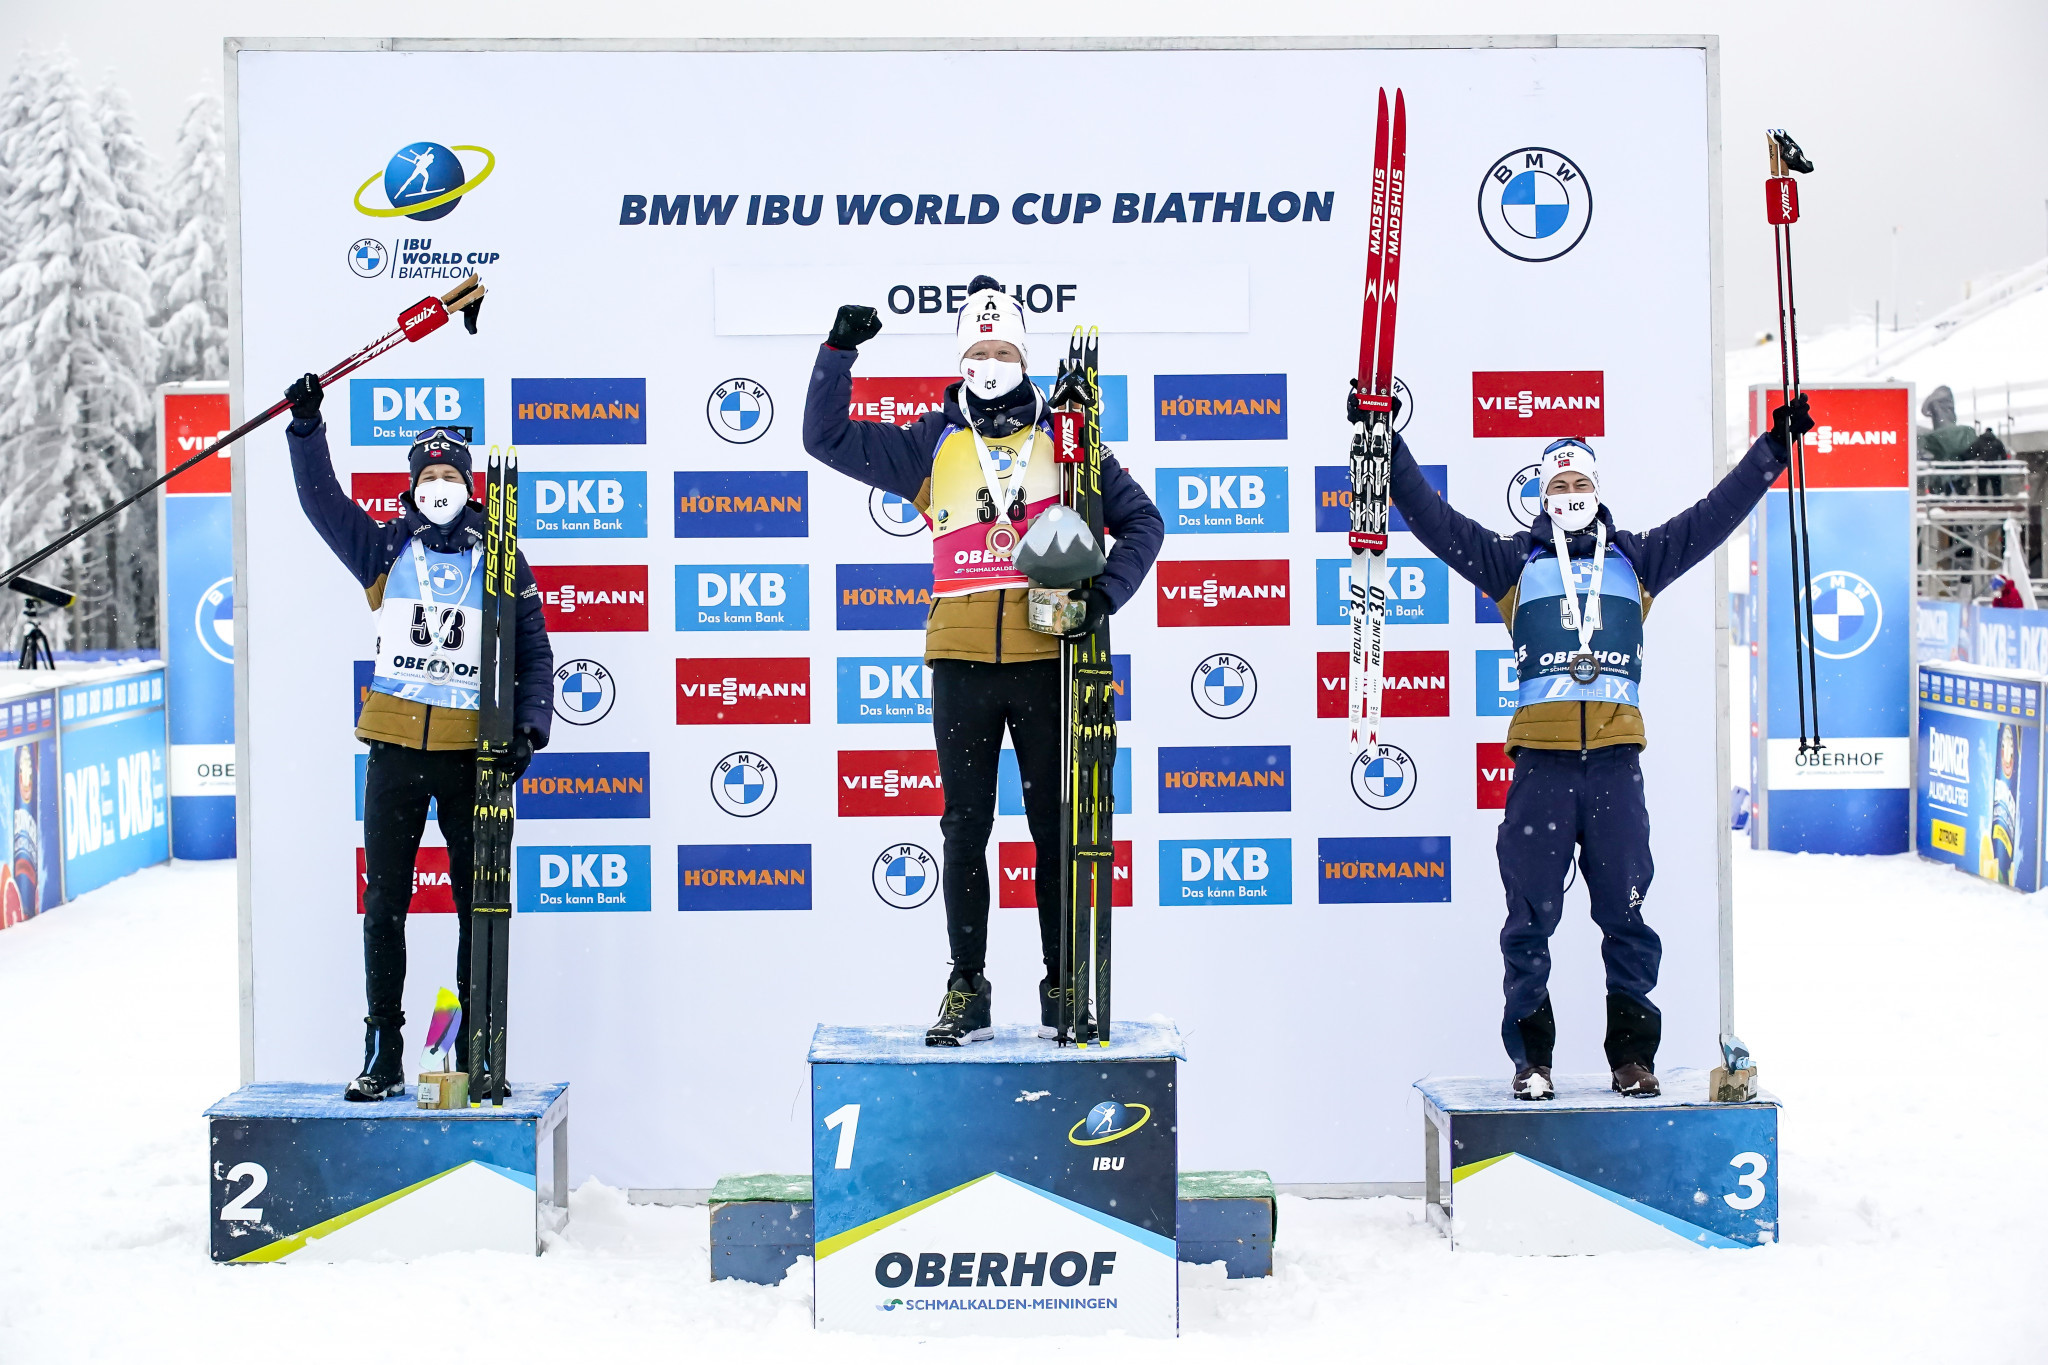 Johannes Thingnes Bø, centre, stands at the top of the podium in Oberhof alongside compatriots Tarjei Bø, left, and Sturla Holm Lægreid ©Getty Images